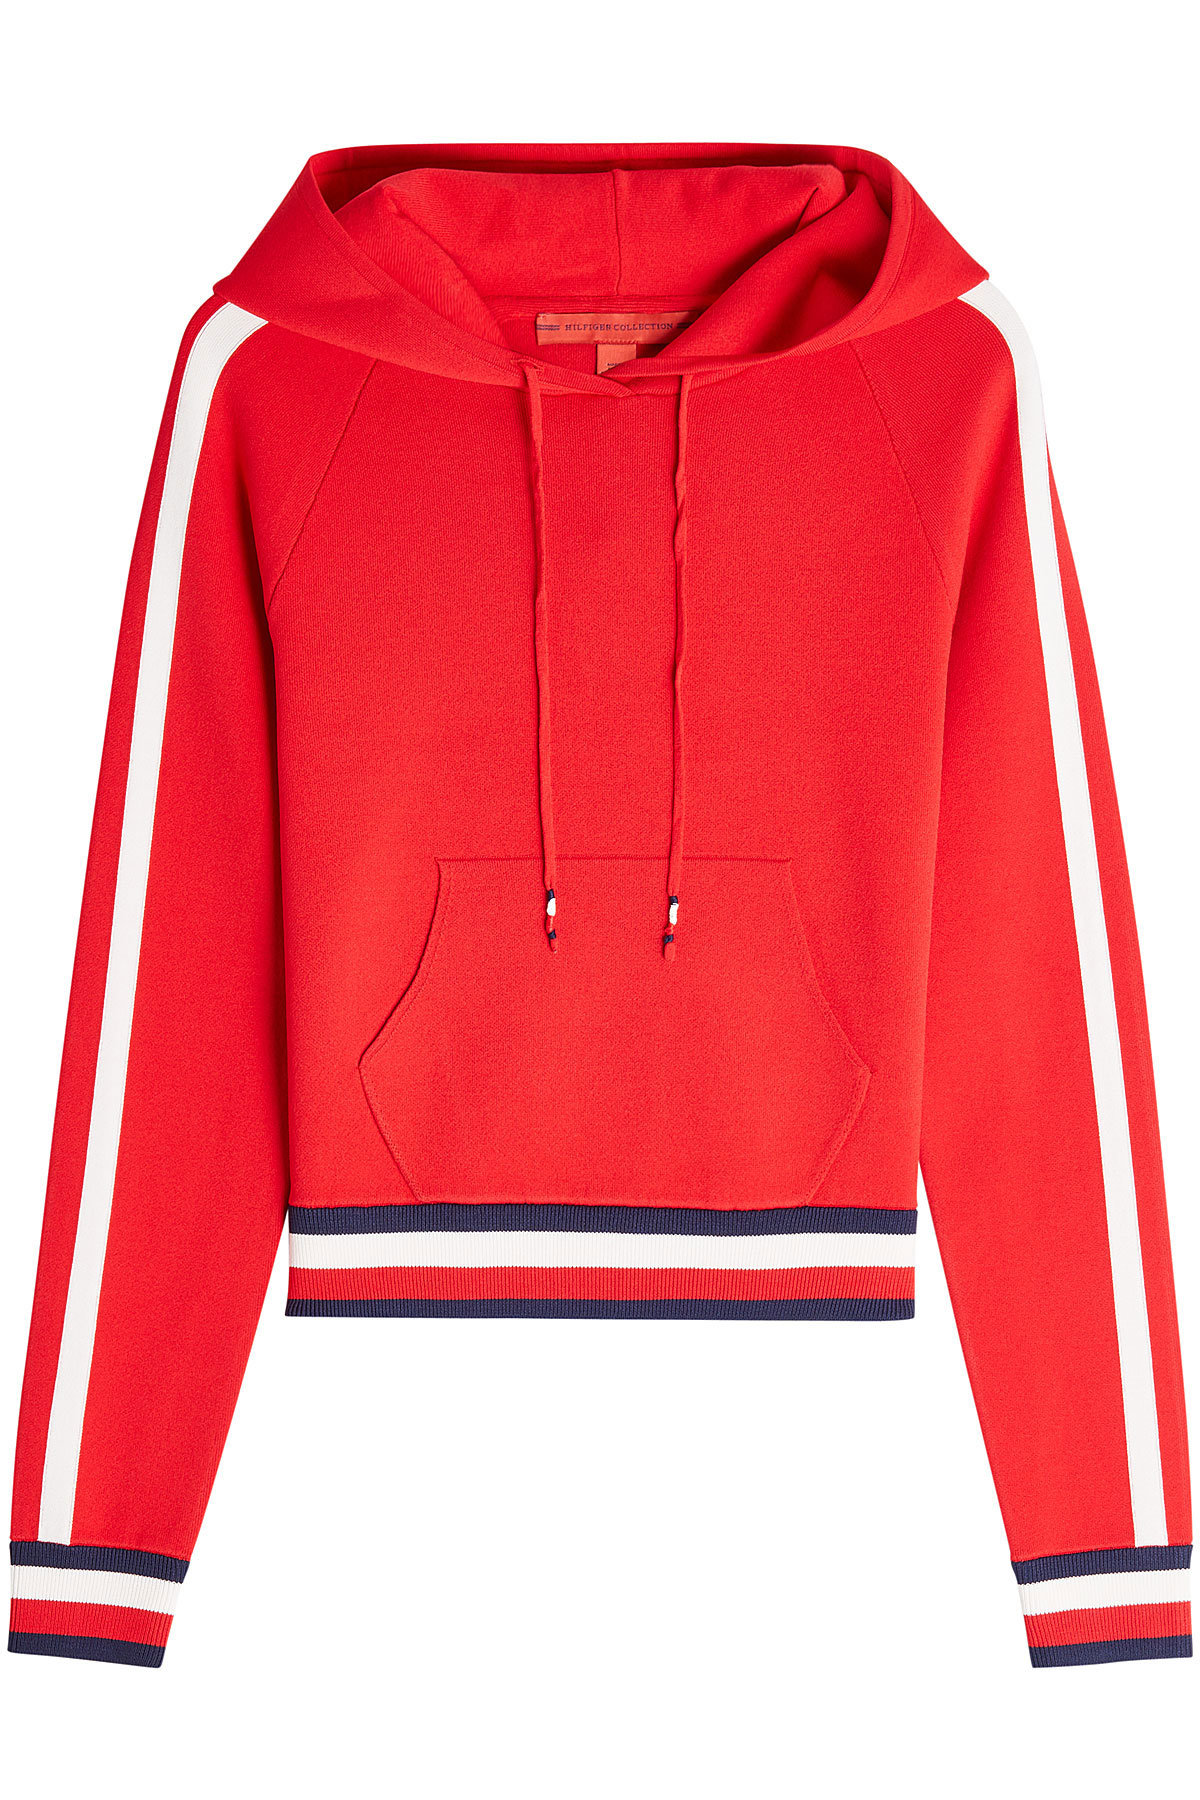 Jersey Hoodie by Hilfiger Collection